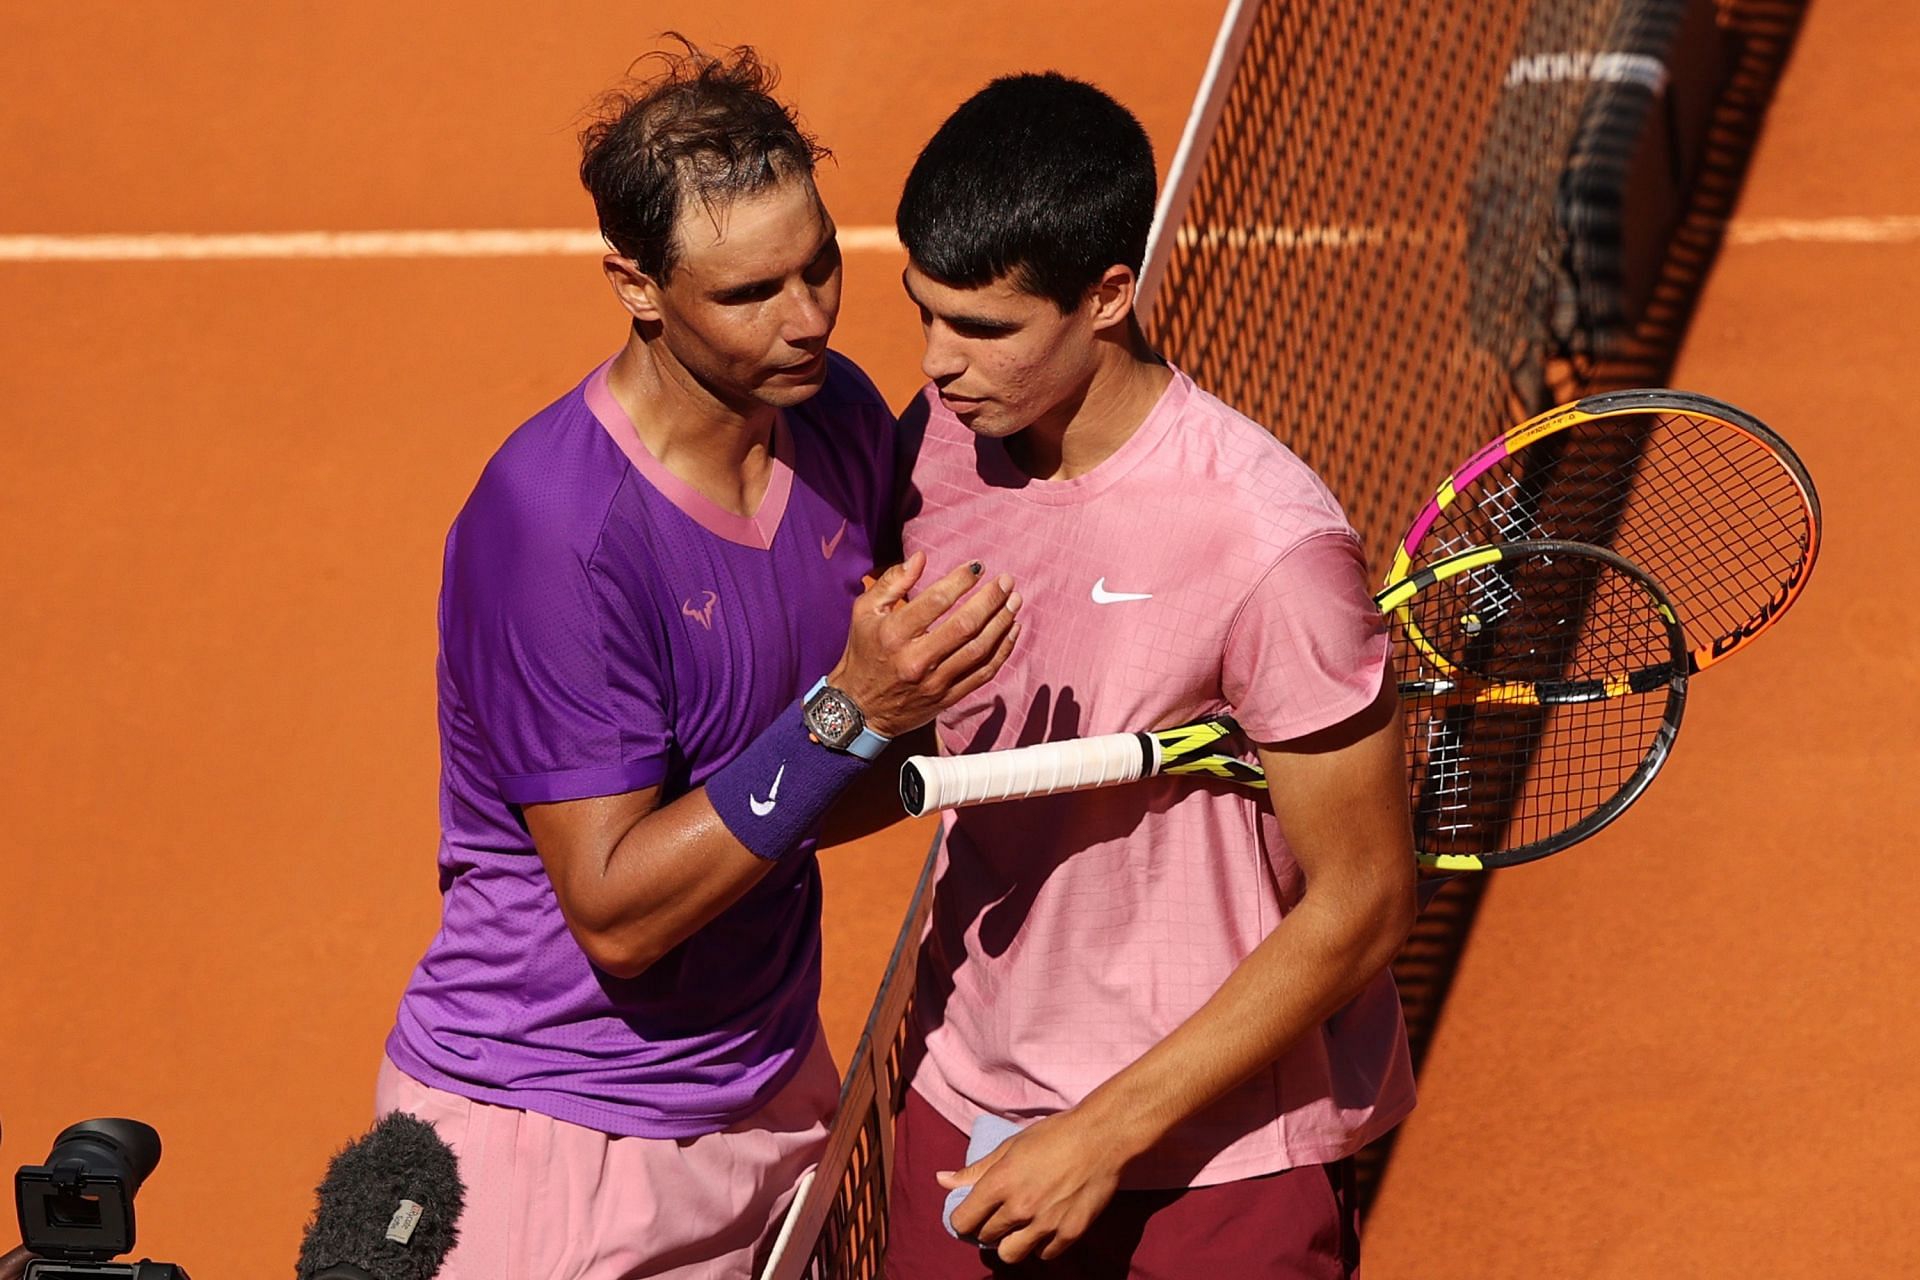 Rafael Nadal beat Carlos Alcaraz in the last and only meeting between the pair